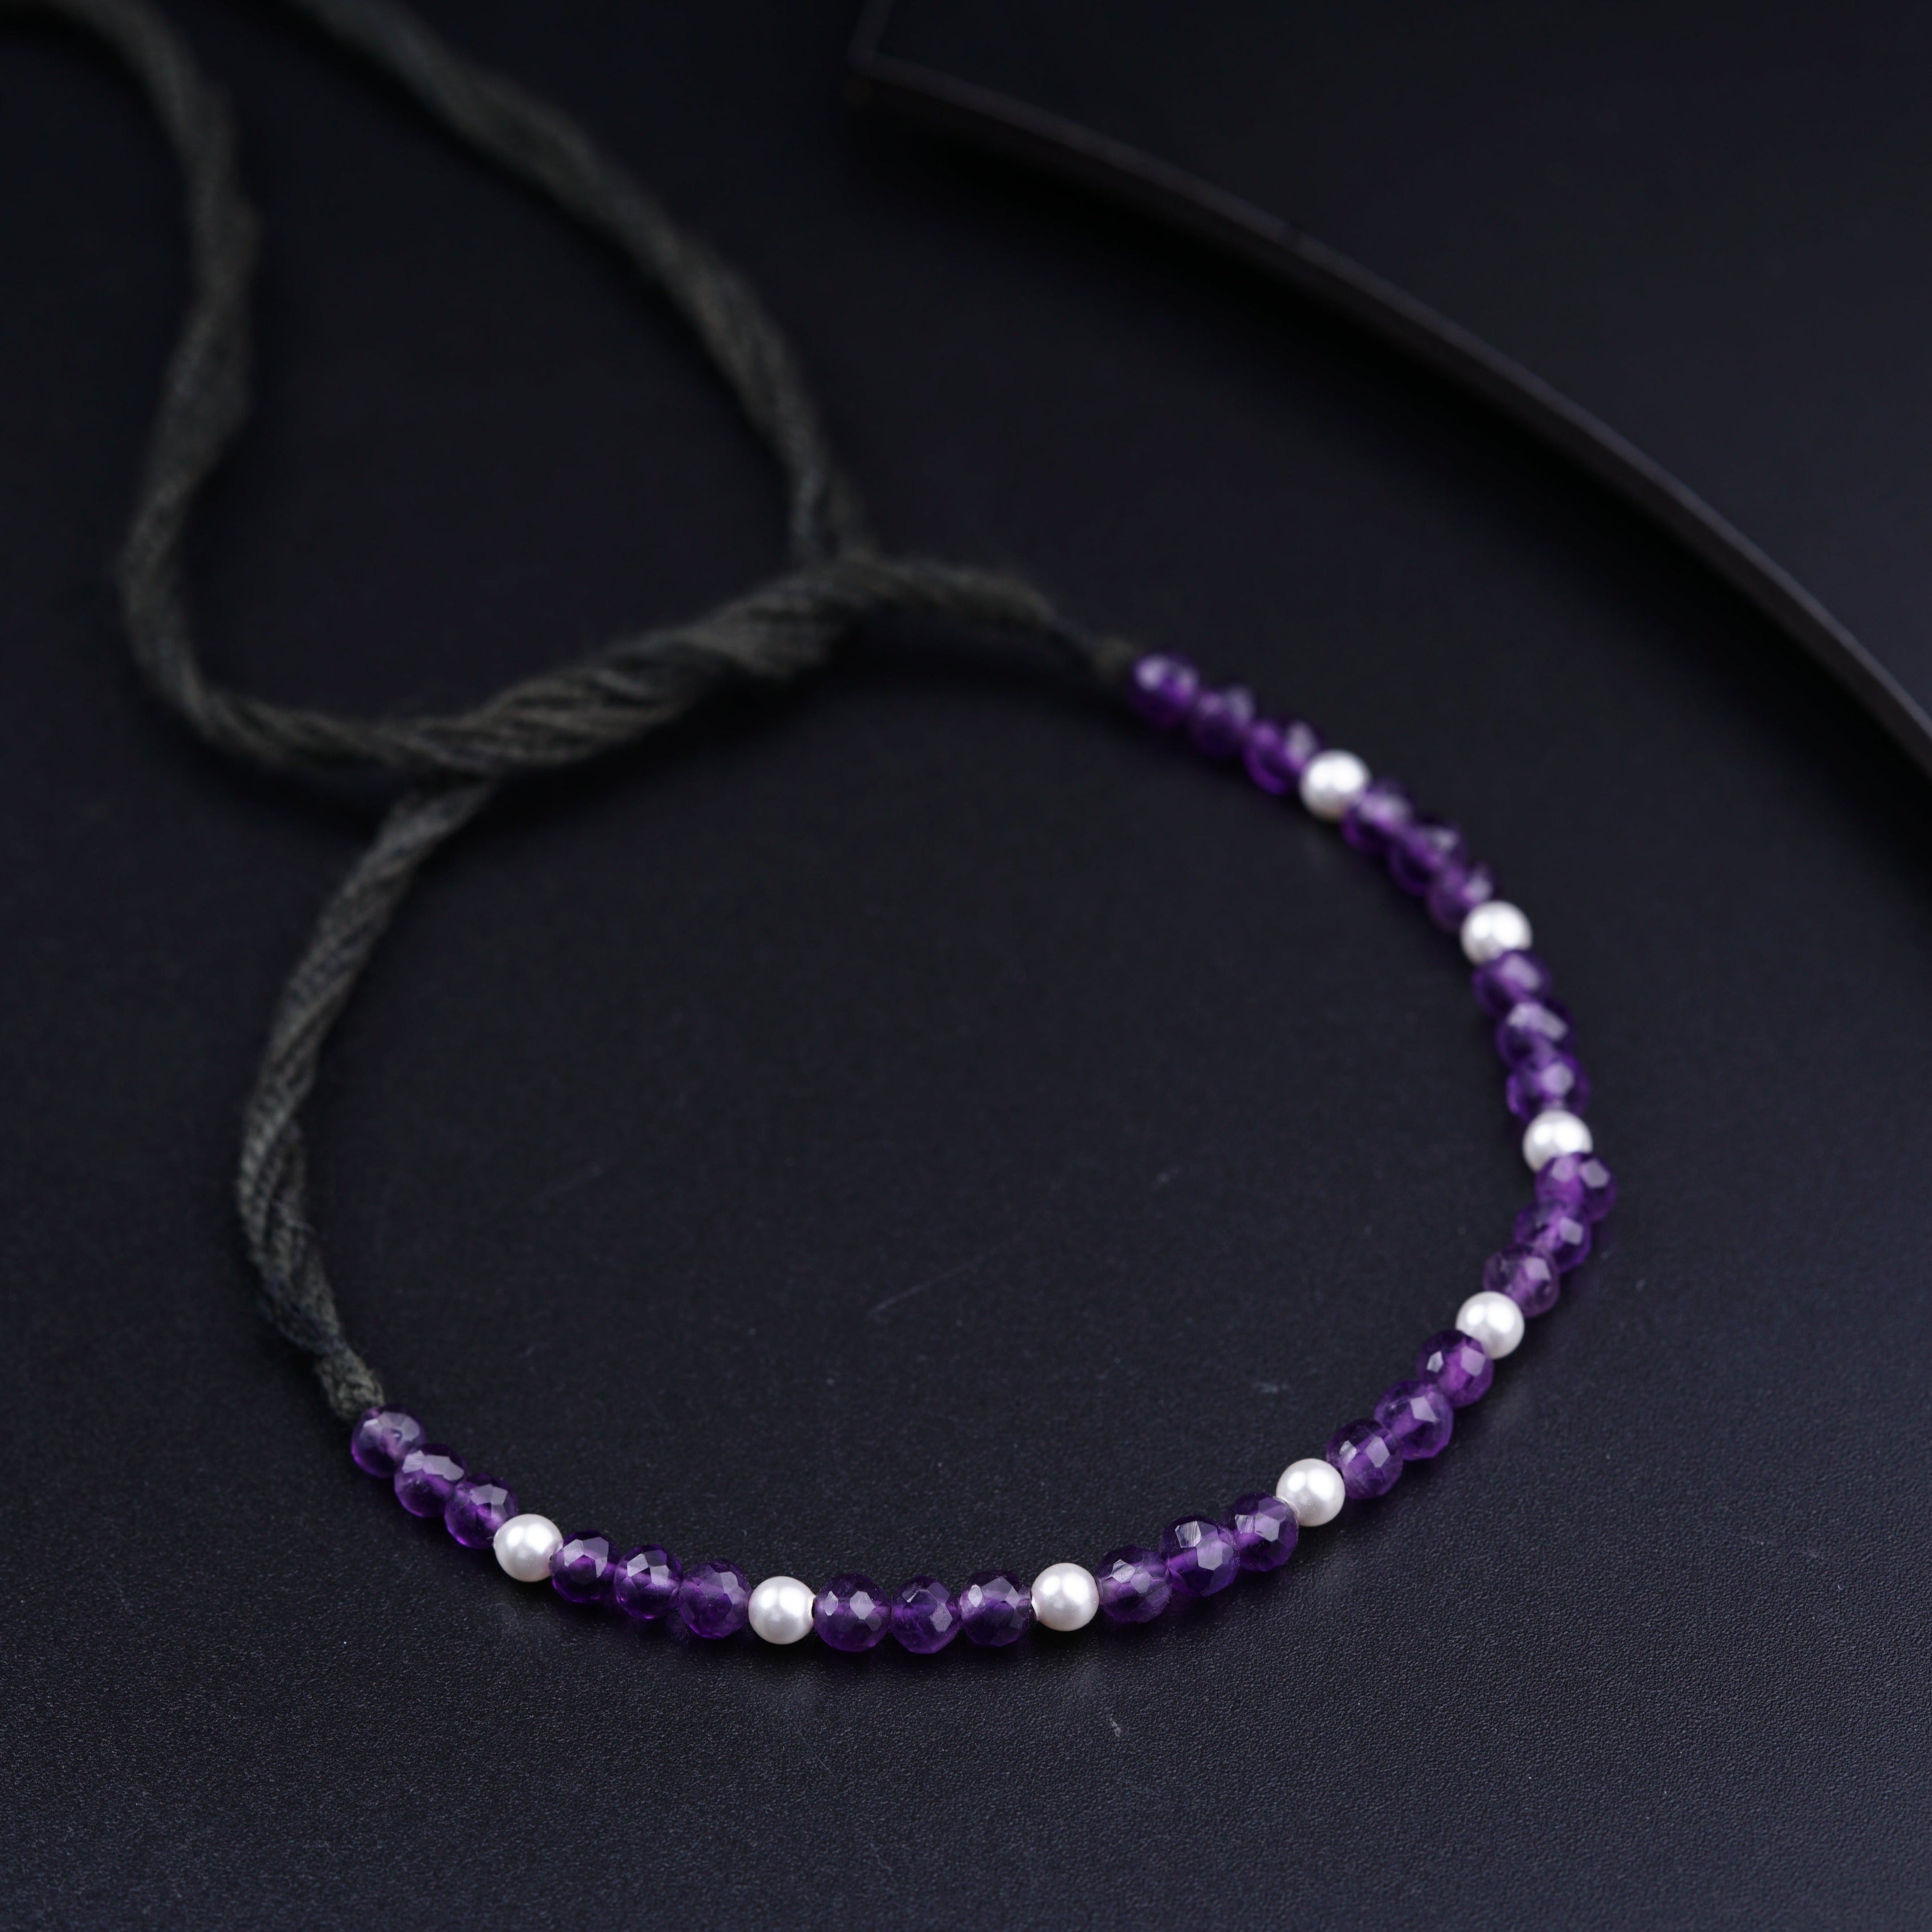 a purple beaded necklace with white beads